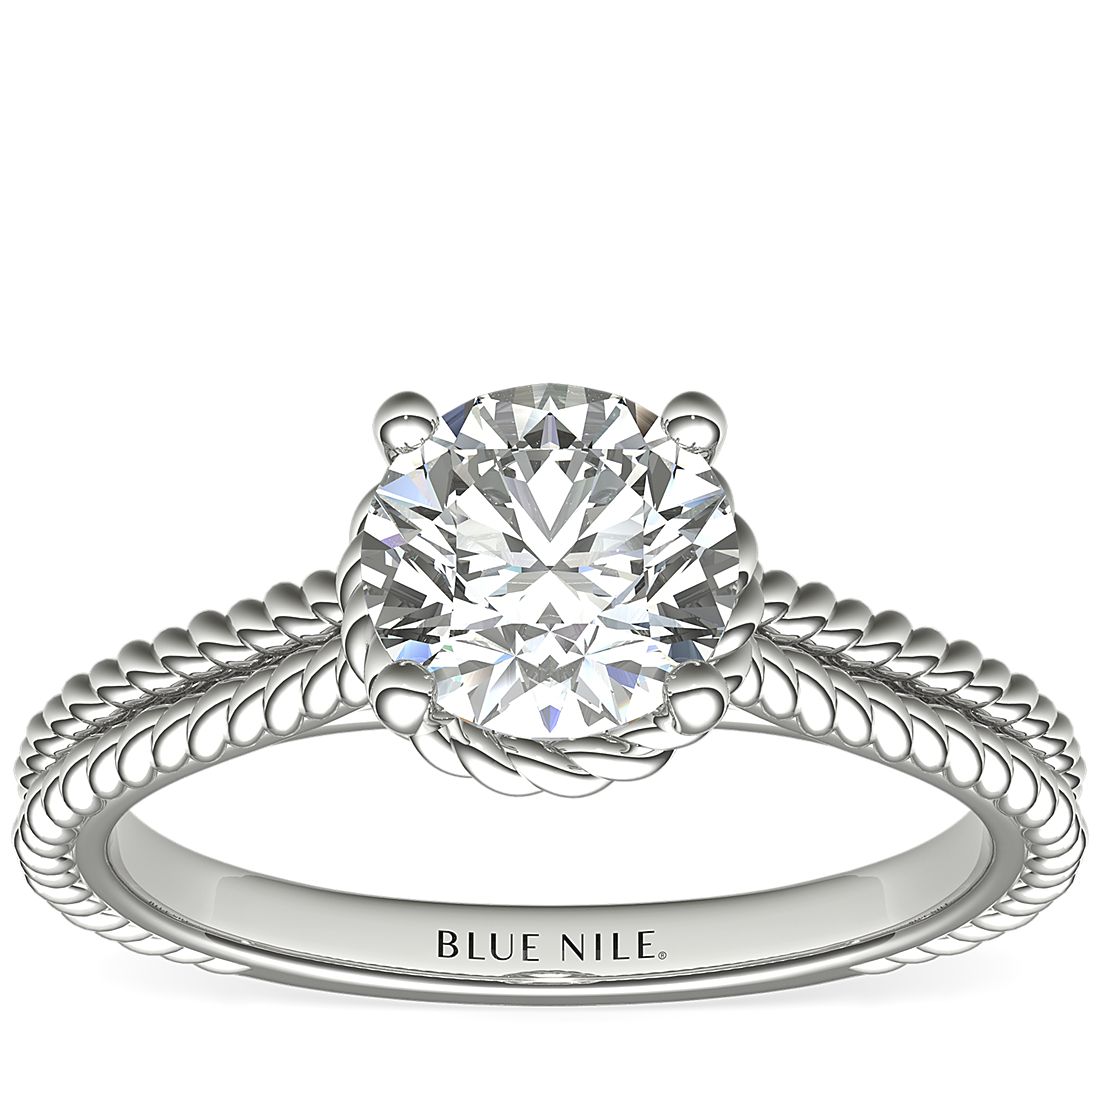 Blue Nile Braid Halo Solitaire 1.08-Carat Round-Cut Diamond Ring in White Gold